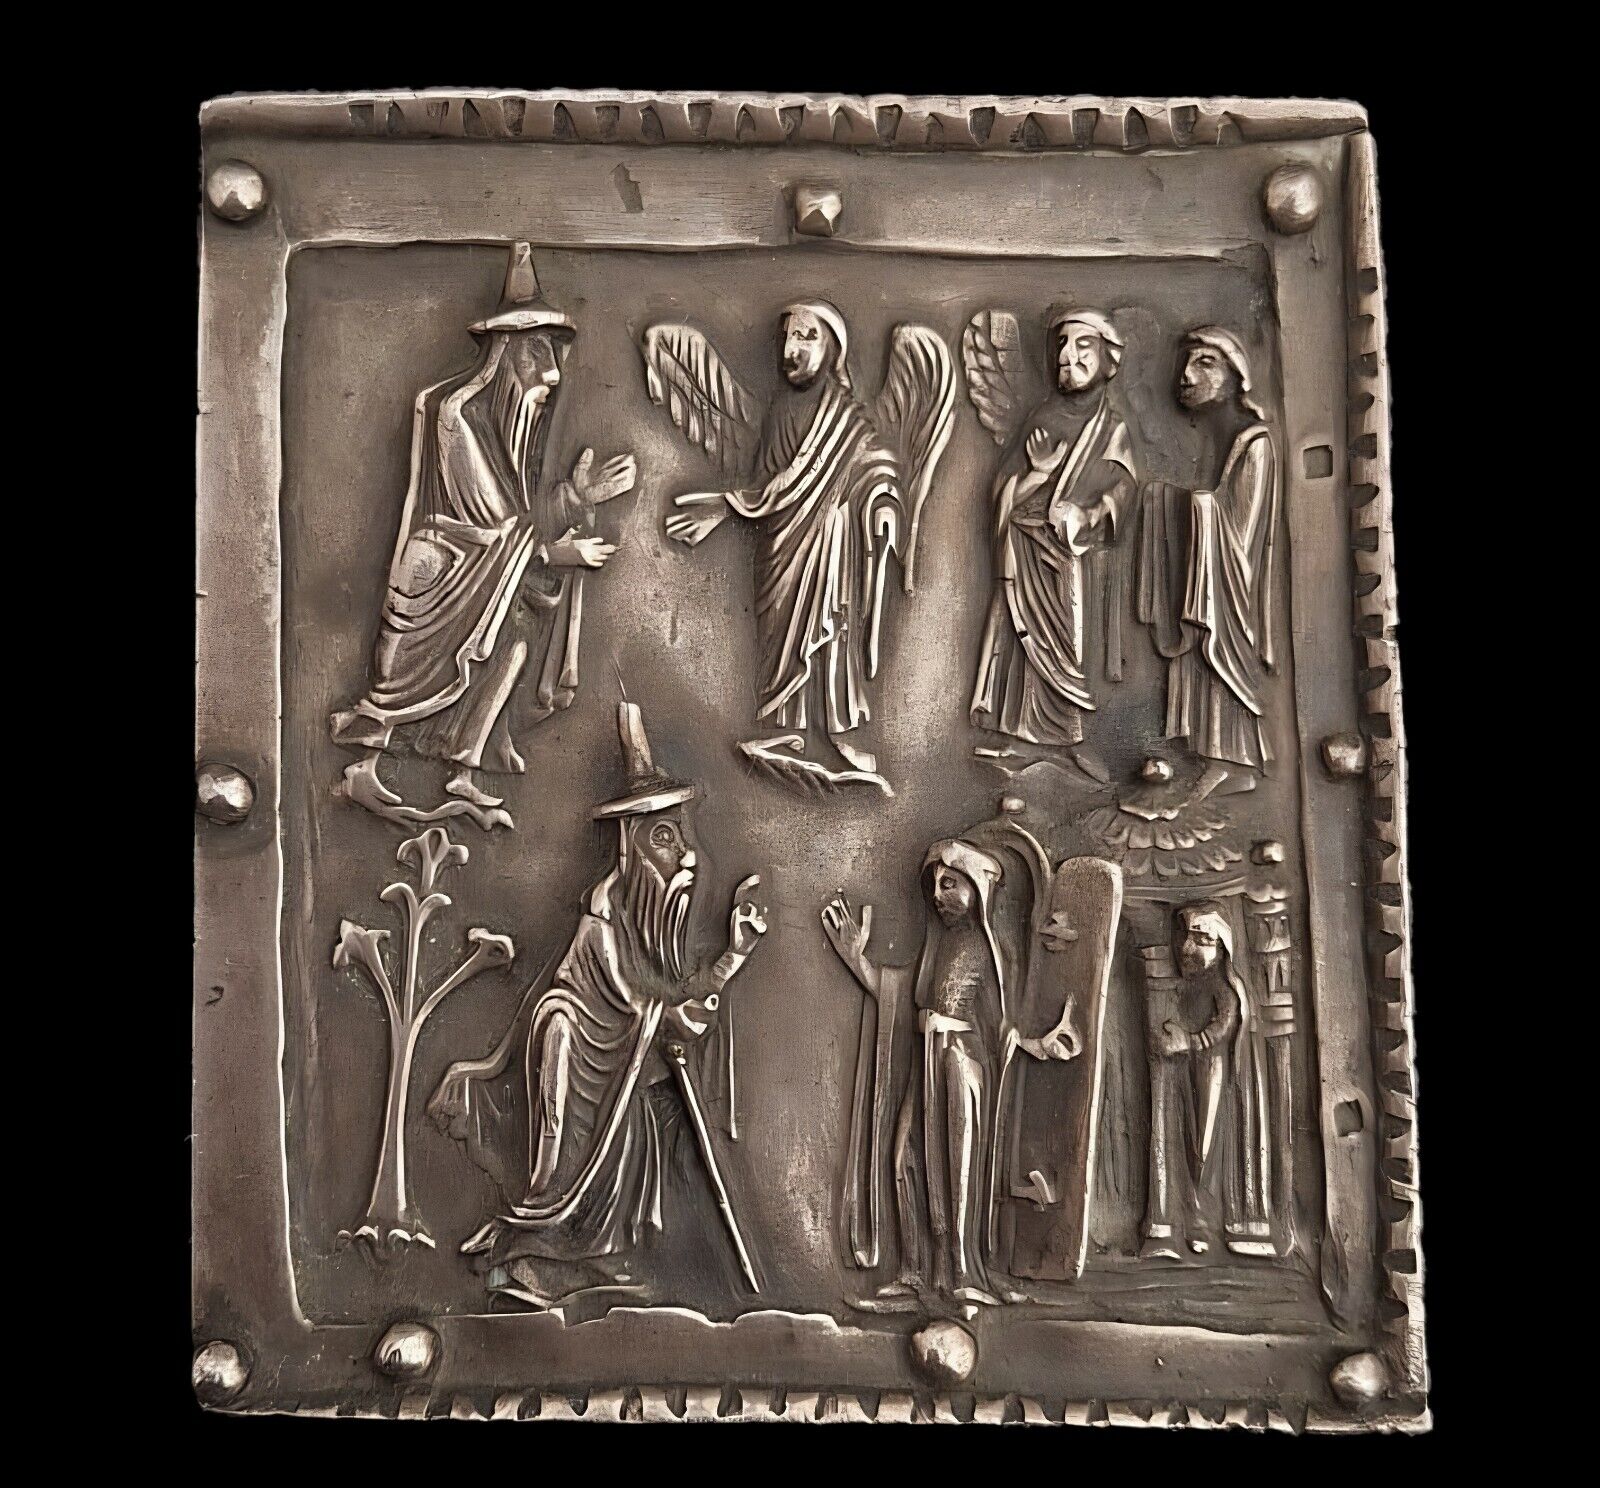 STERLING SILVER 925 OF A PANEL FROM THE BASILICA OF SAN ZENTO IN VERONA